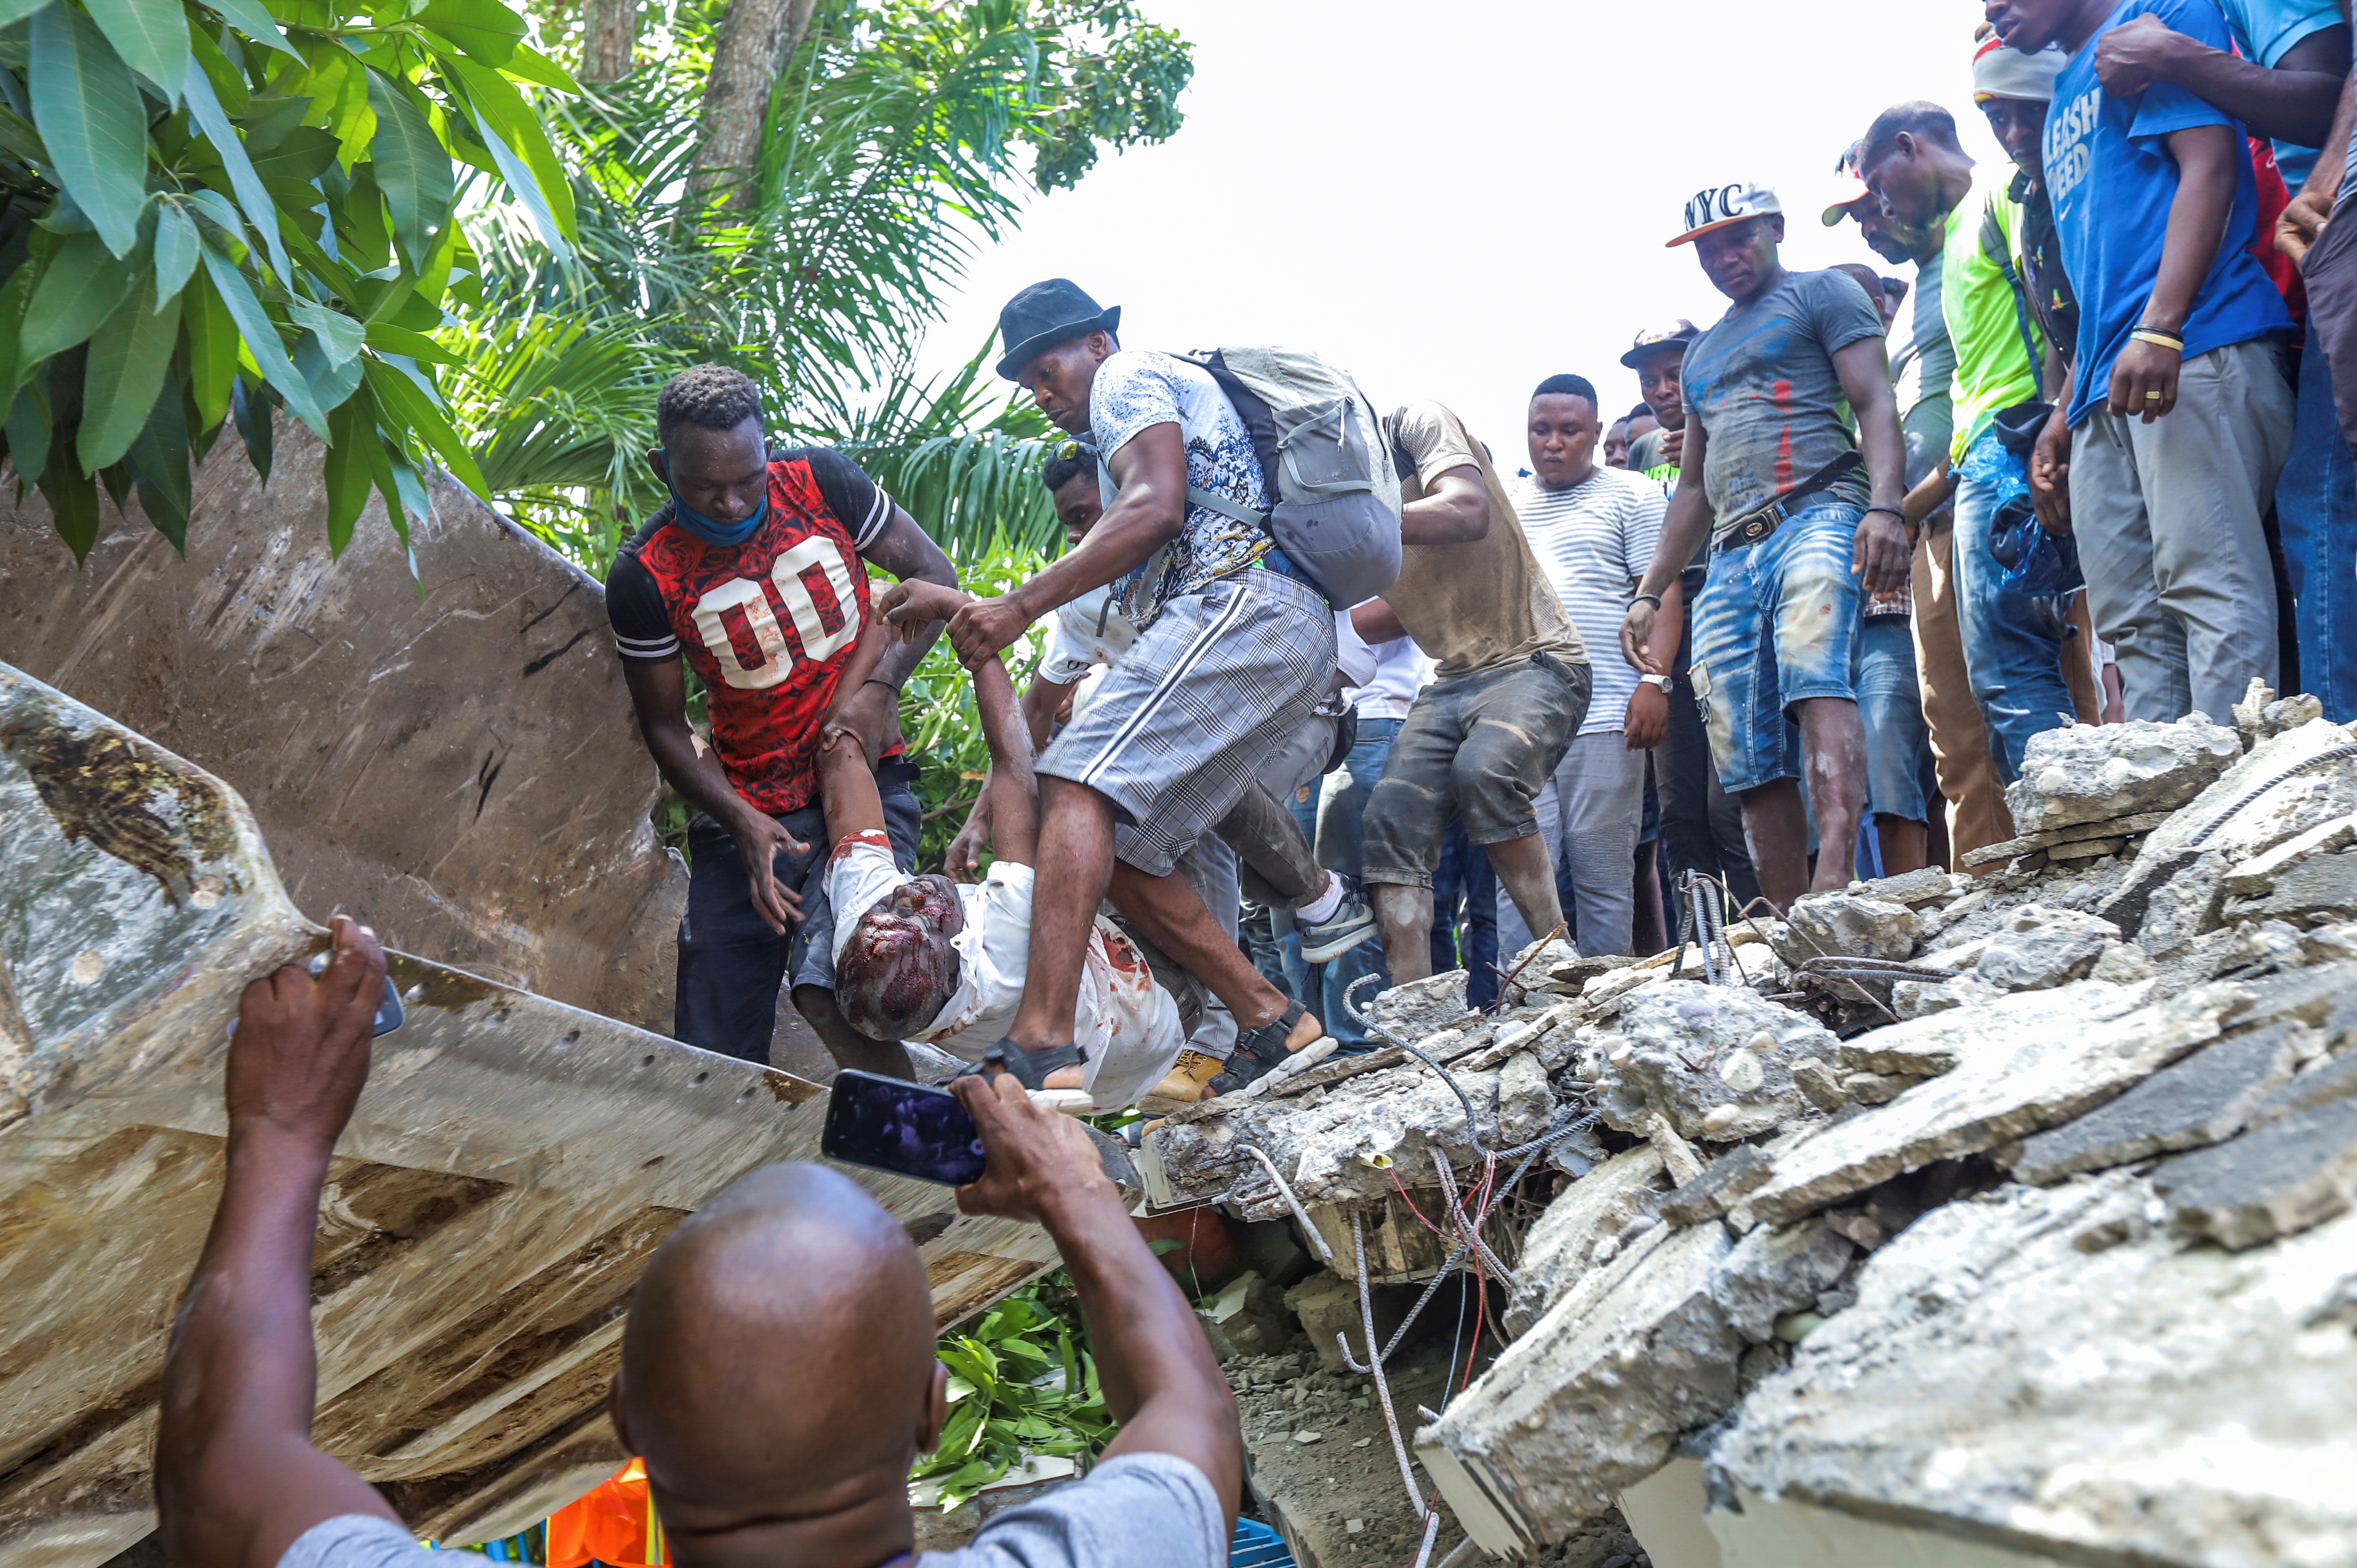 SENSITIVE MATERIAL. THIS IMAGE MAY OFFEND OR DISTURB People recover the body of politician Jean Gabriel Fortune from the rubble of a hotel following a 7.2 magnitude earthquake in Les Cayes, Haiti August 14, 2021. REUTERS/Ralph Tedy Erol NO RESALES. NO ARCHIVES